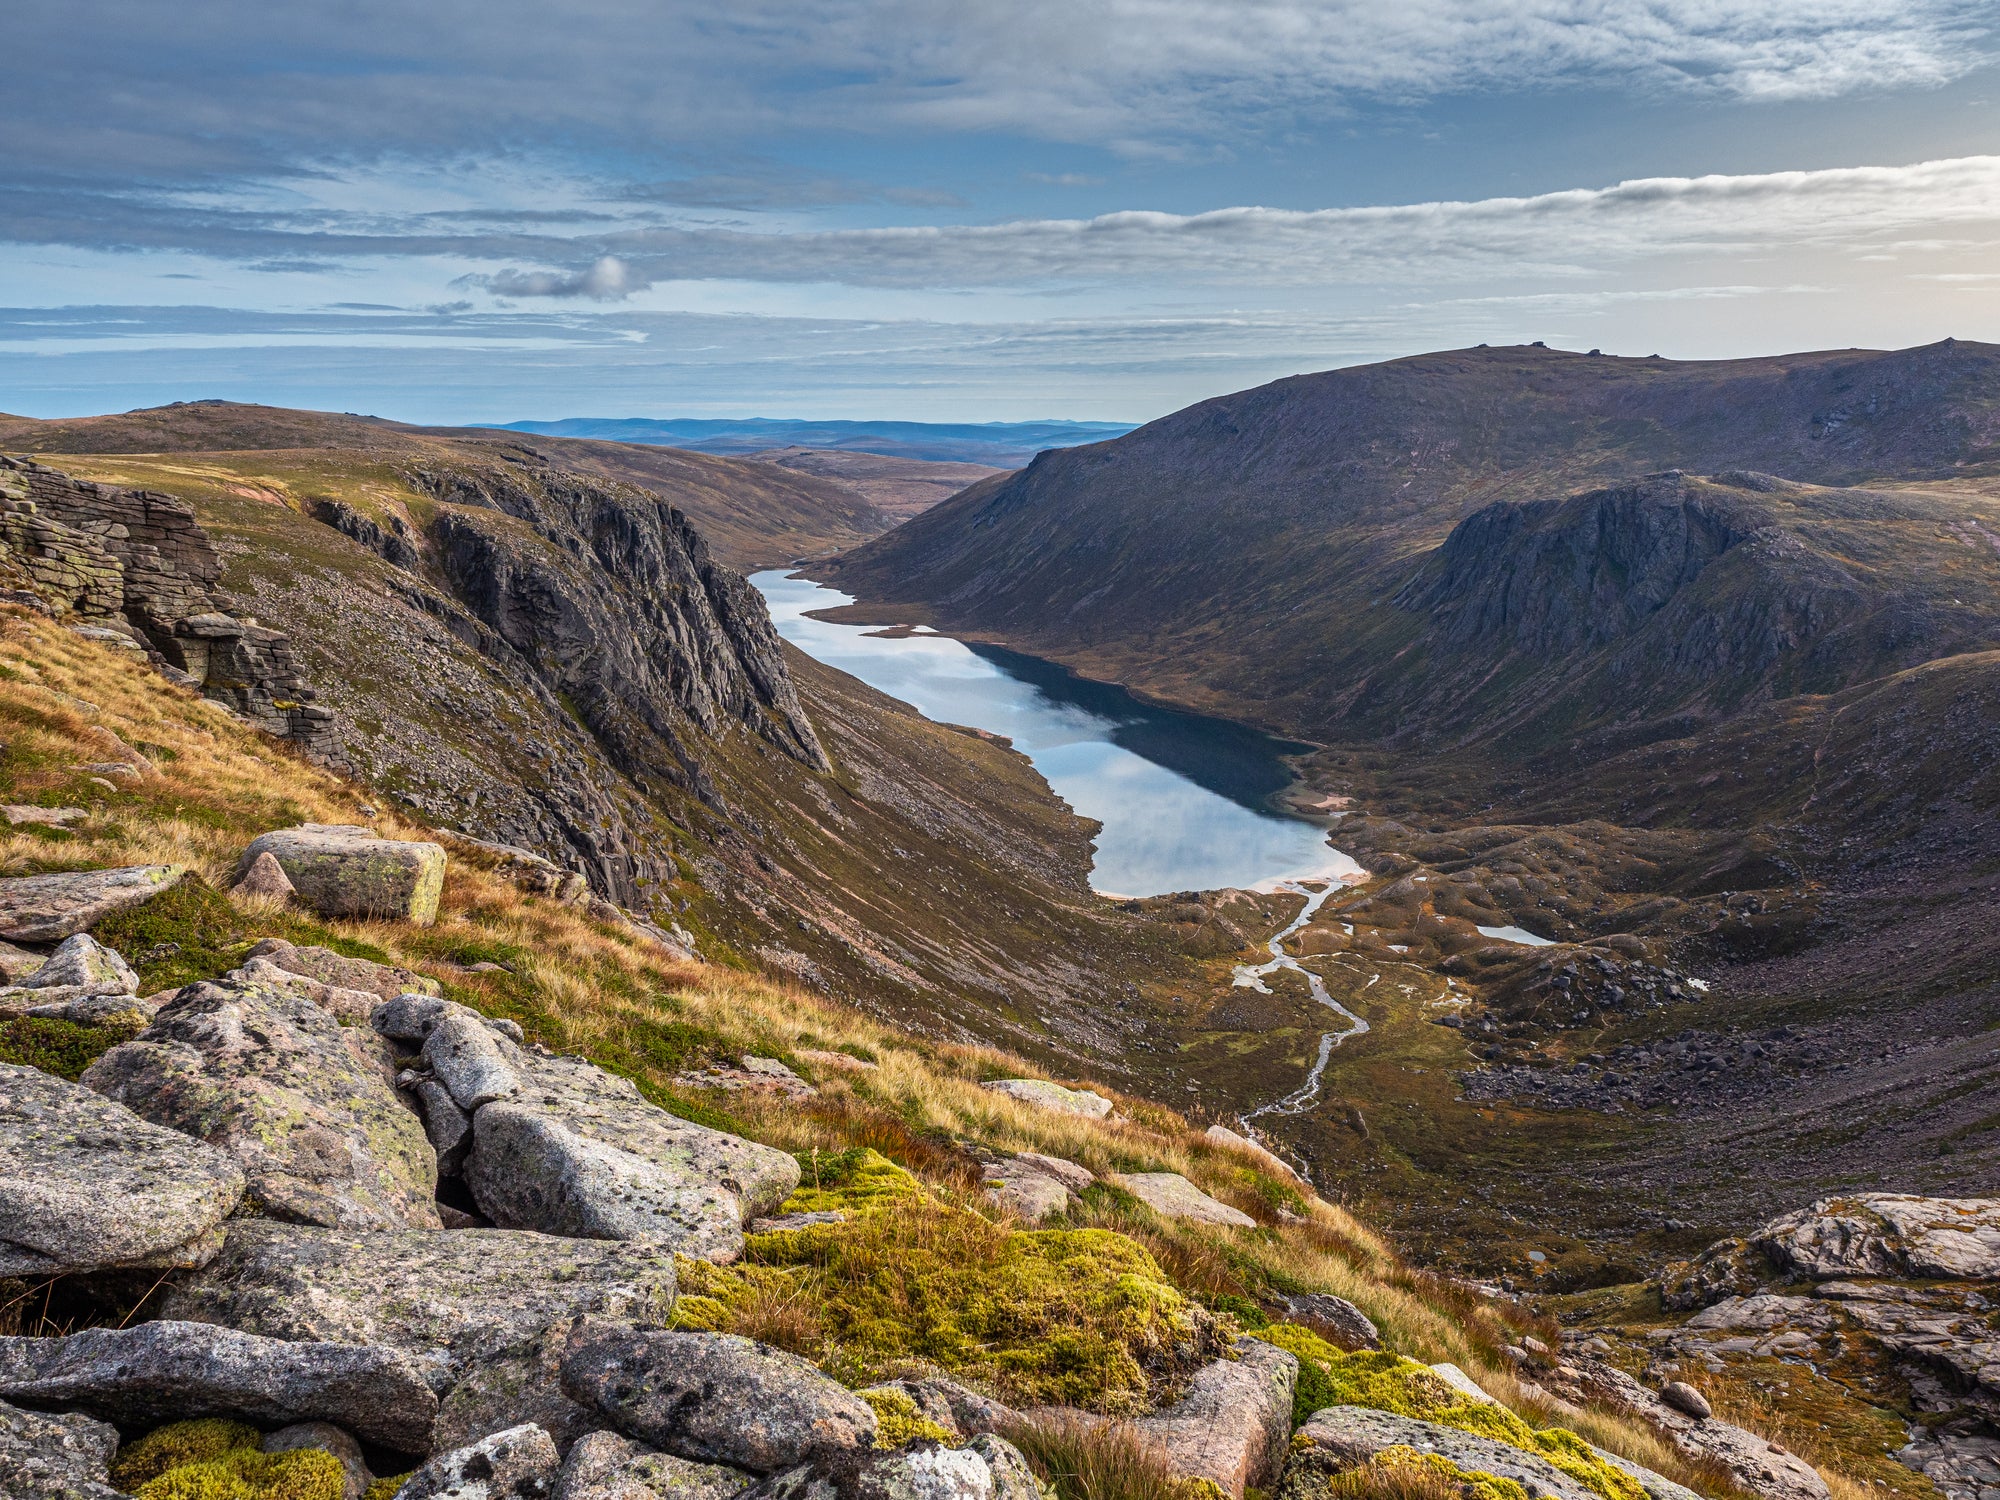 Hills, forests and lochs blanket the Cairngorm Mountains range